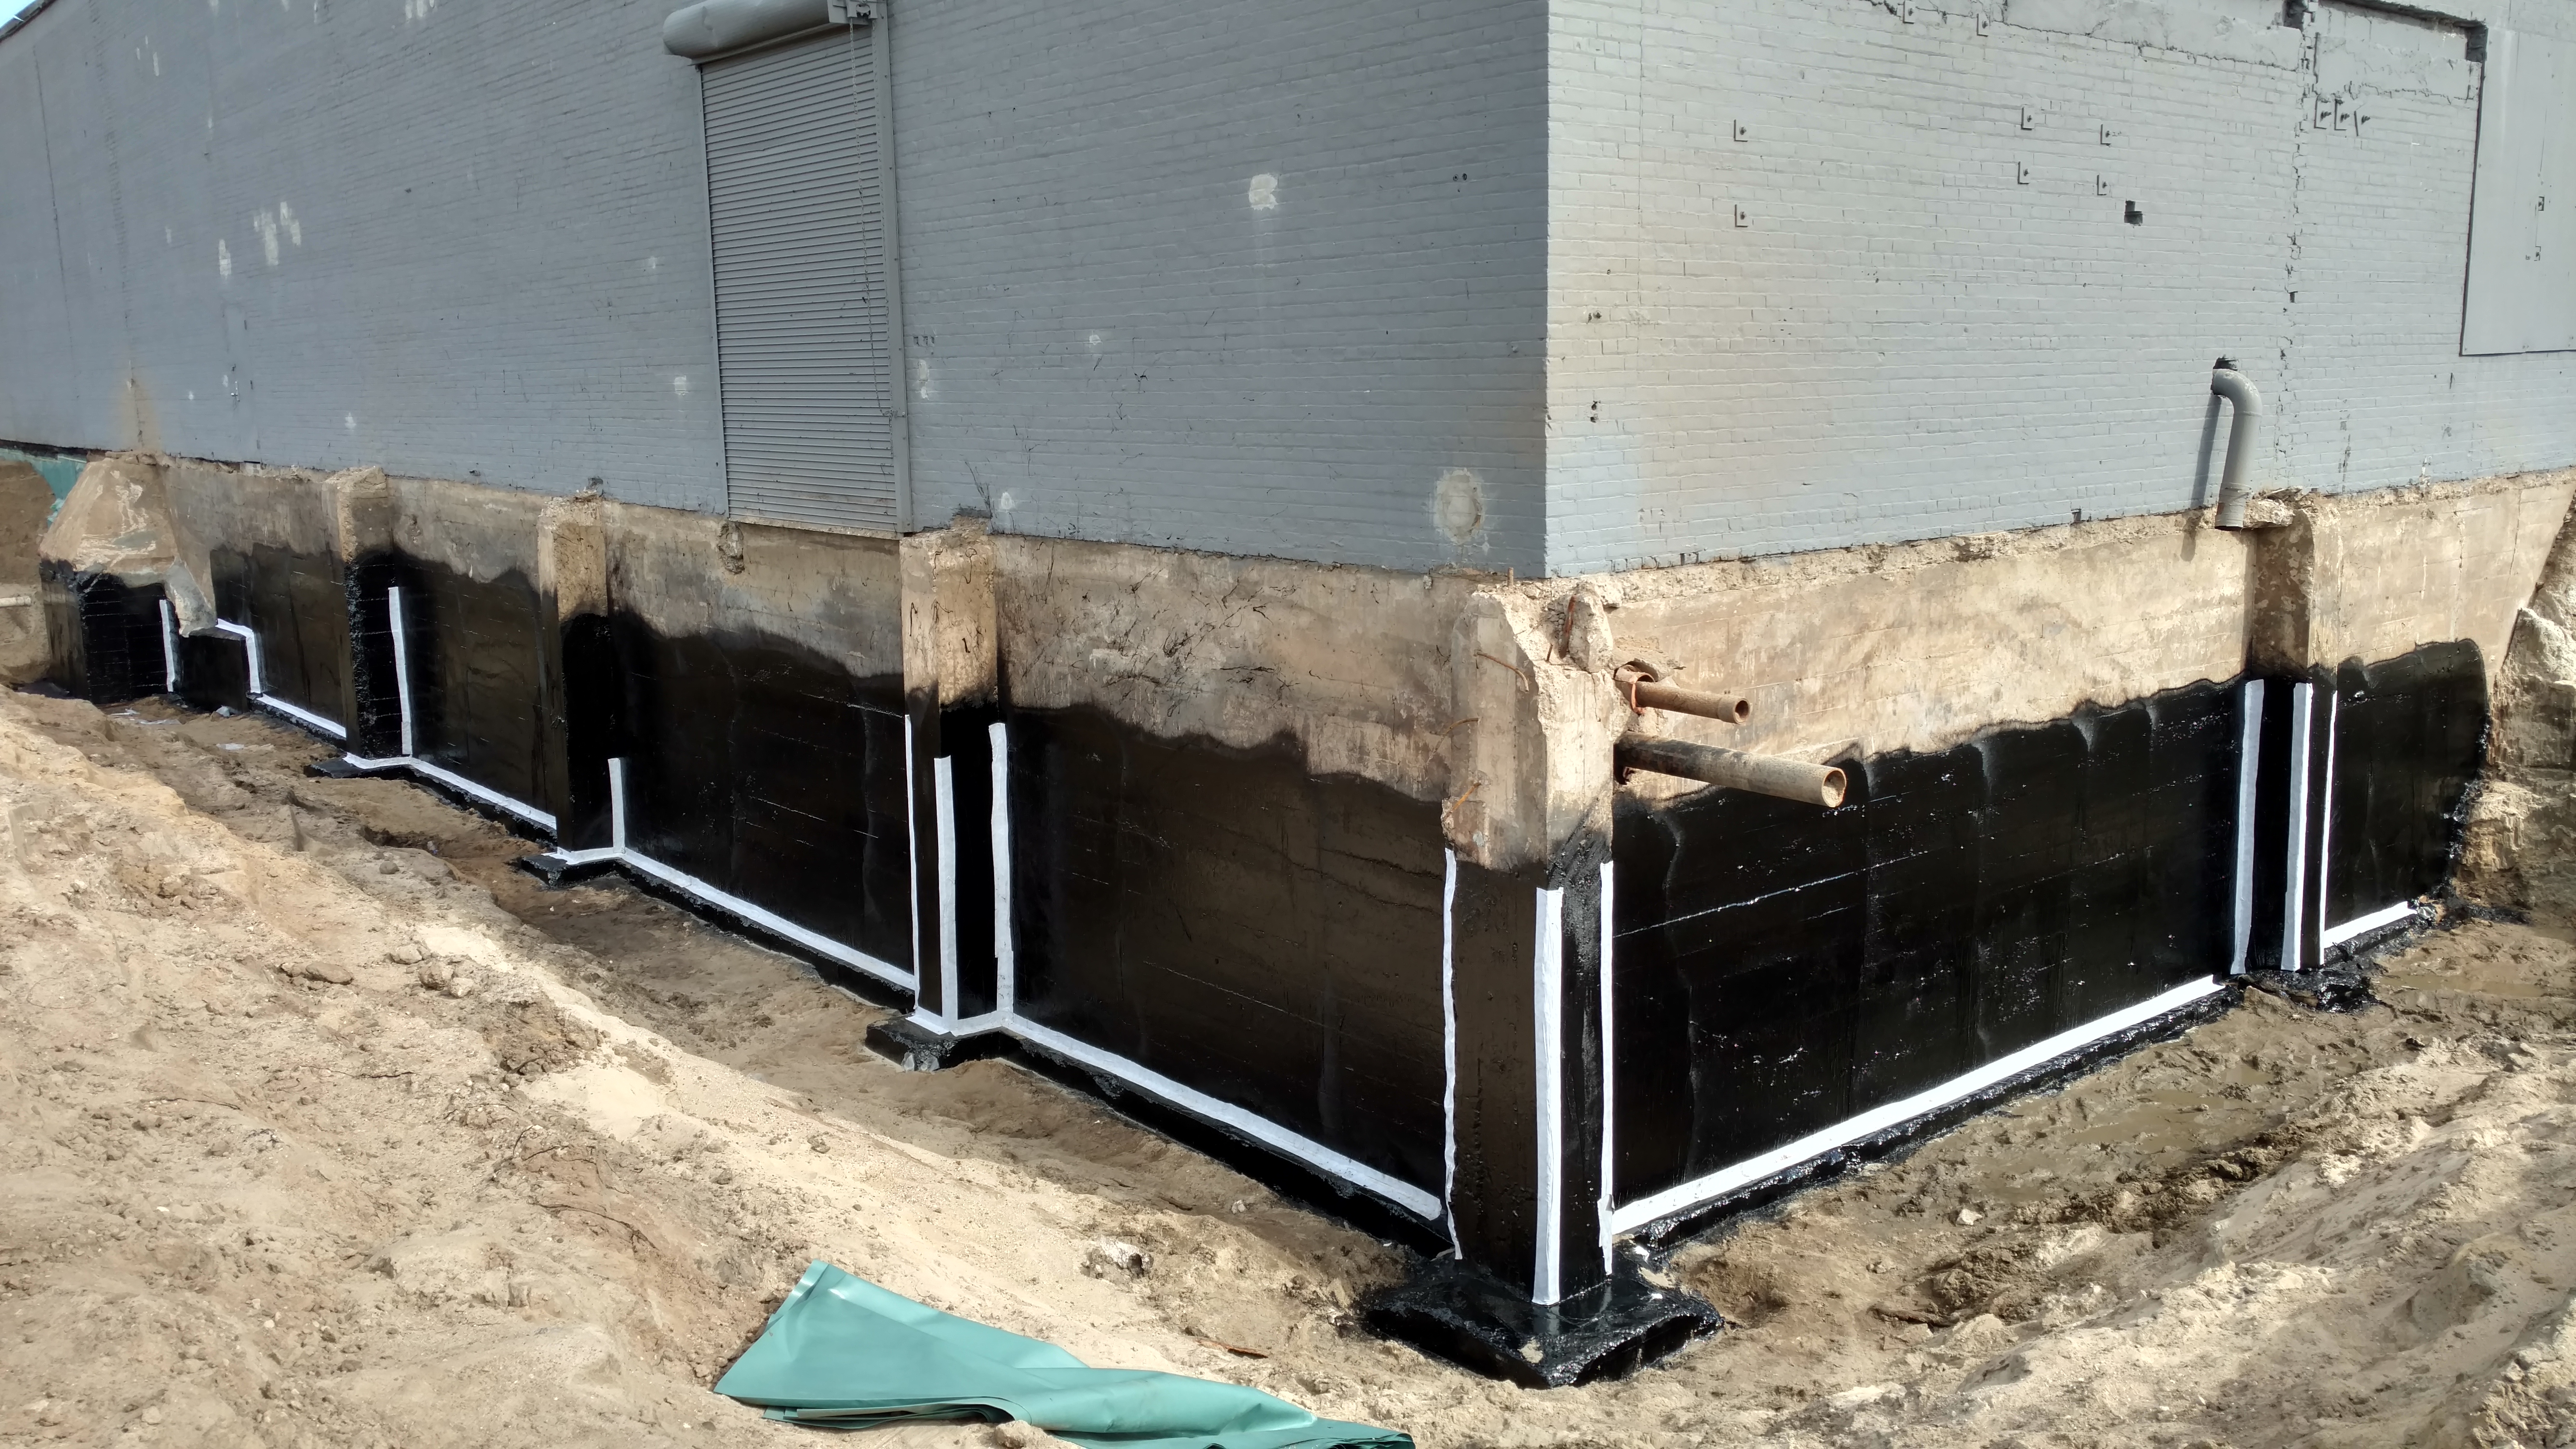 This shows the bottom part of a structure where a waterproofing system would be.